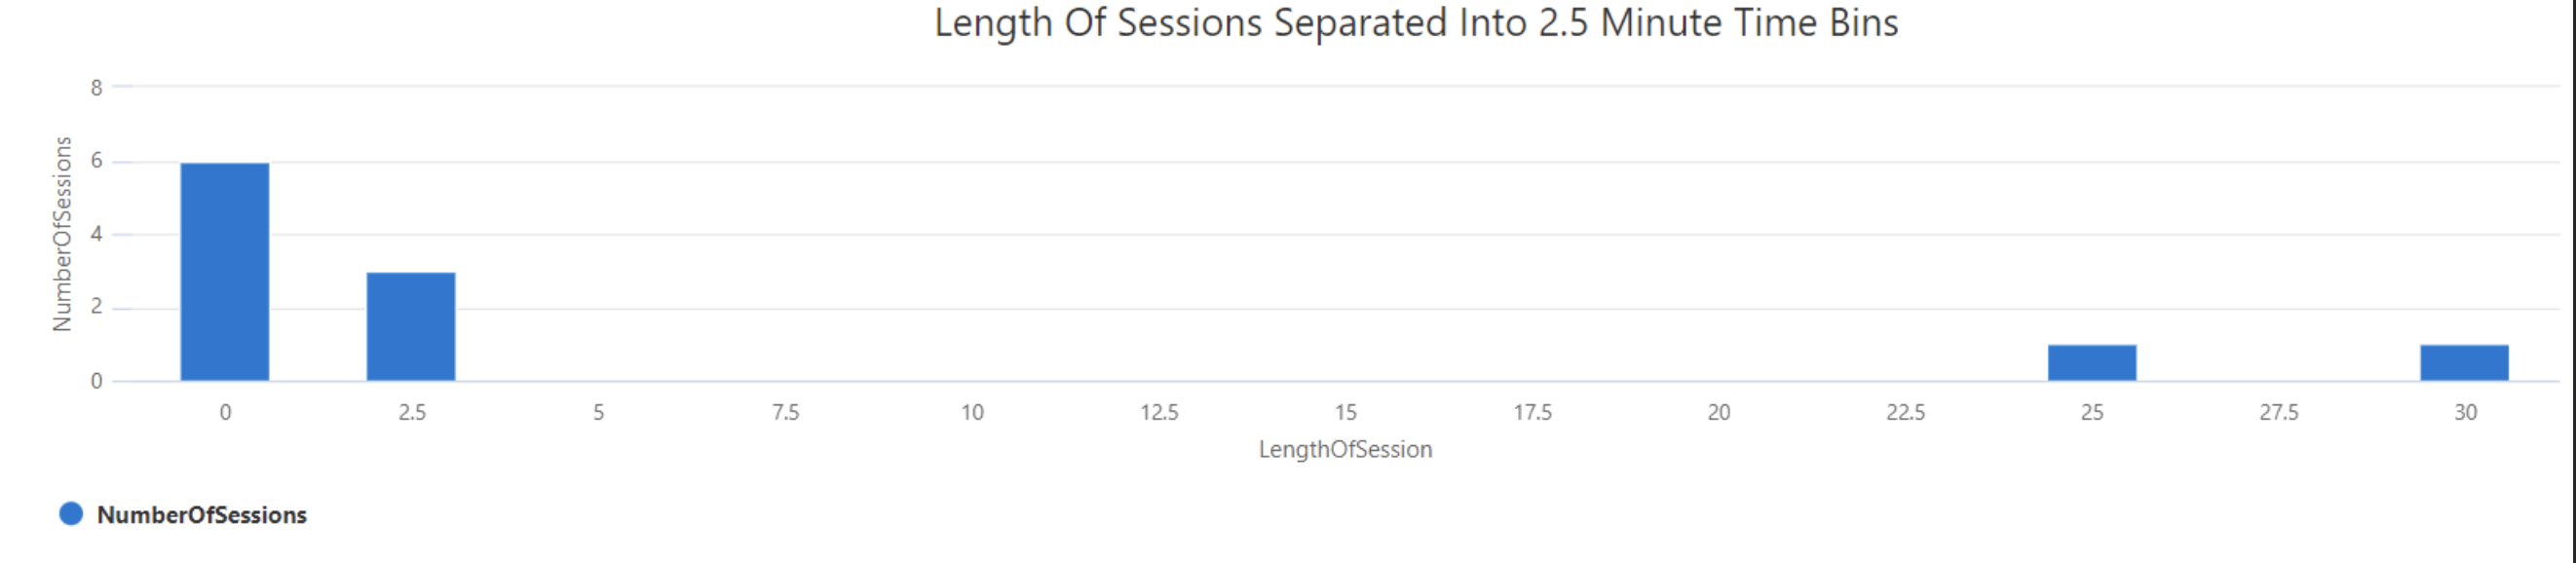 Length of Individual Sessions in Minutes